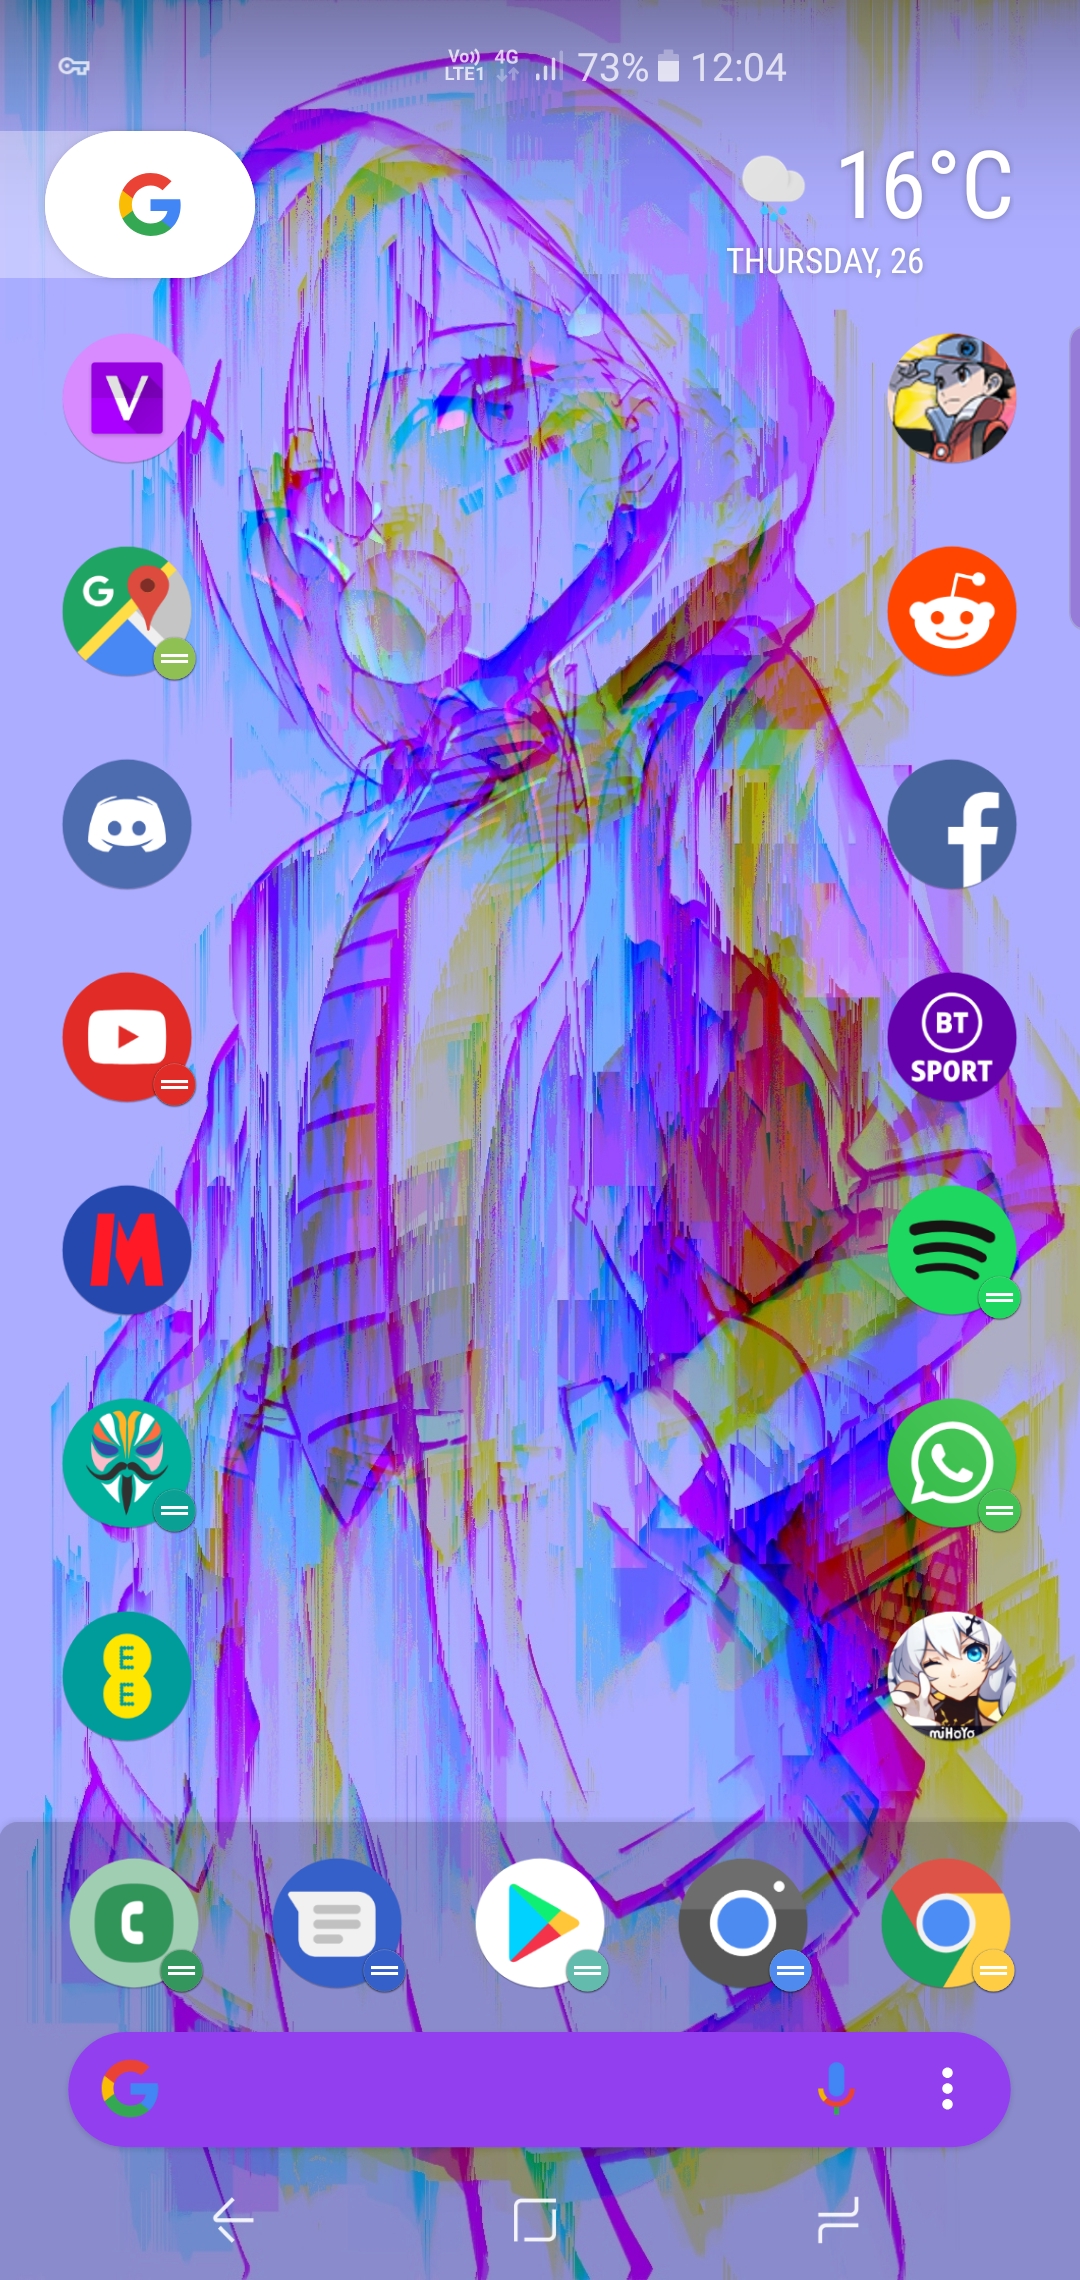 Post your Android homescreen! | Page 52 | GBAtemp.net - The Independent ...